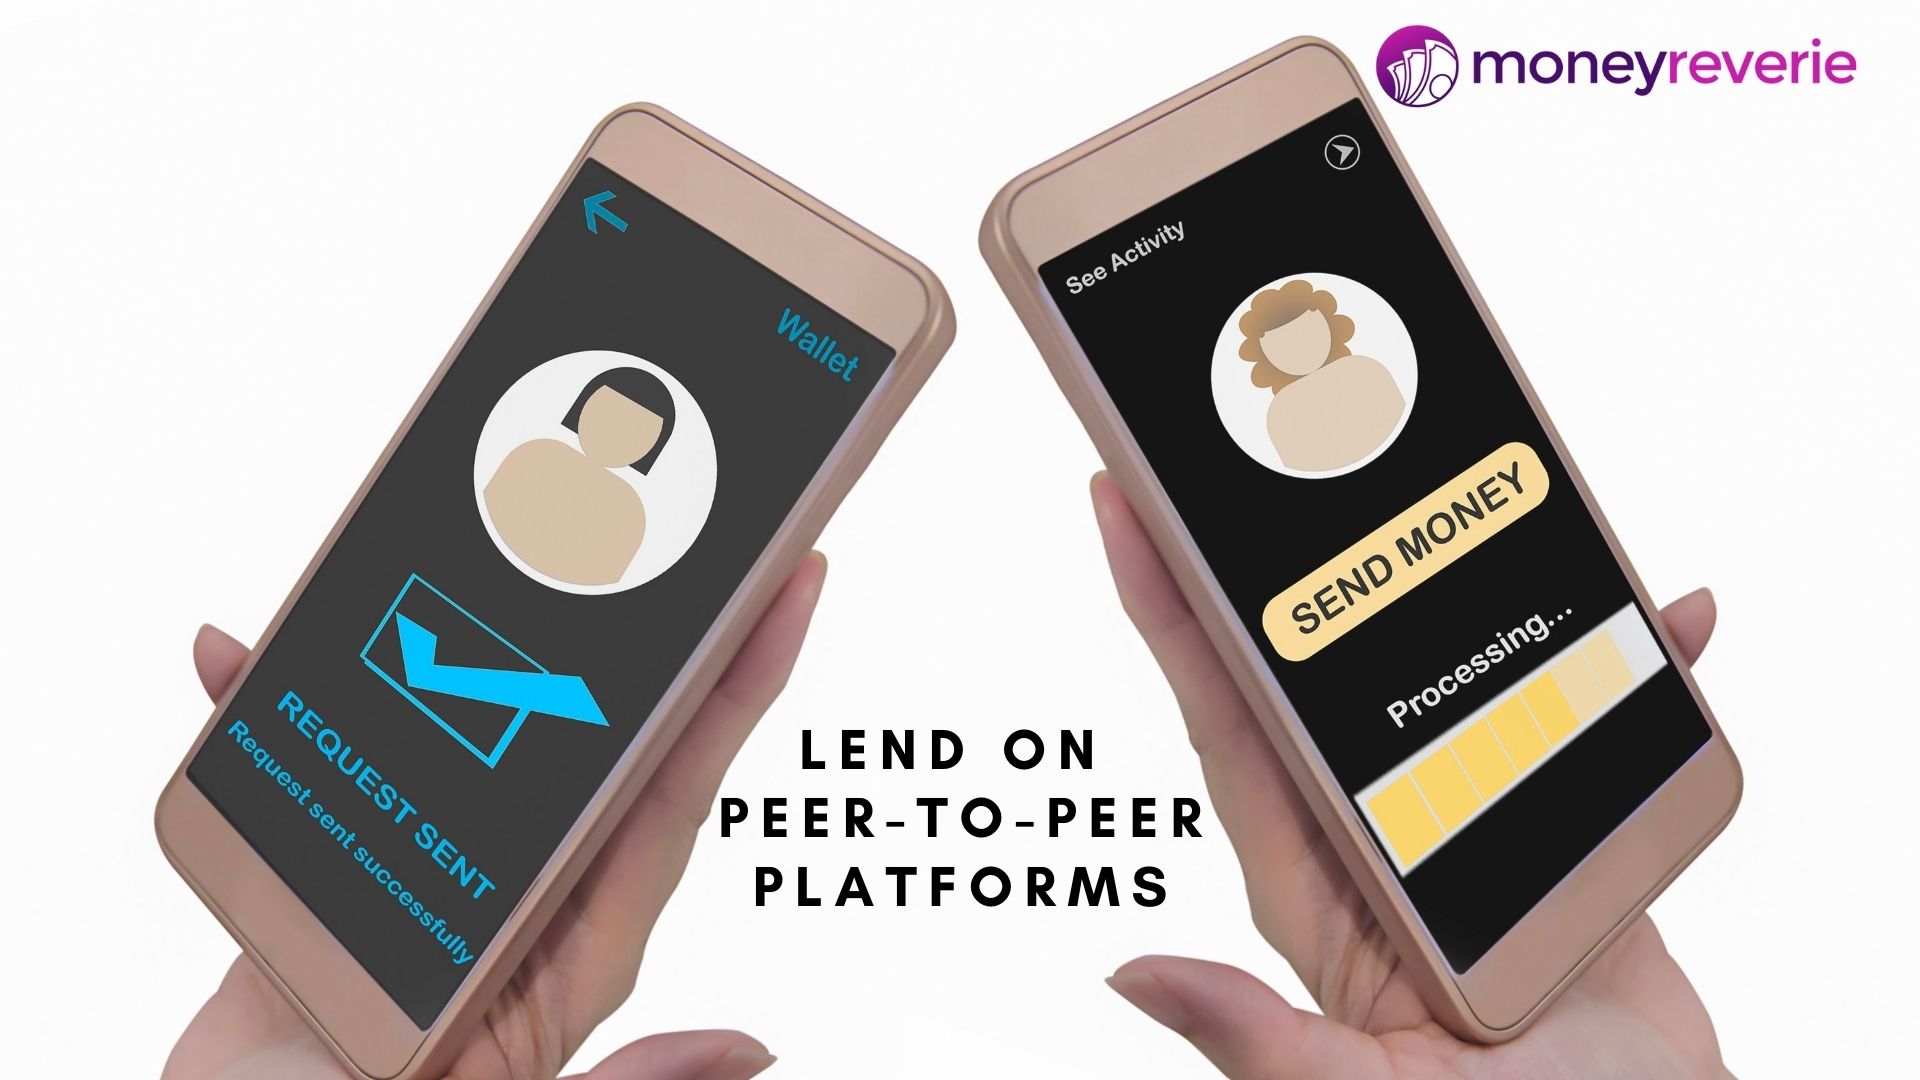 Lend on Peer-to-Peer Platforms- passive income in Canada